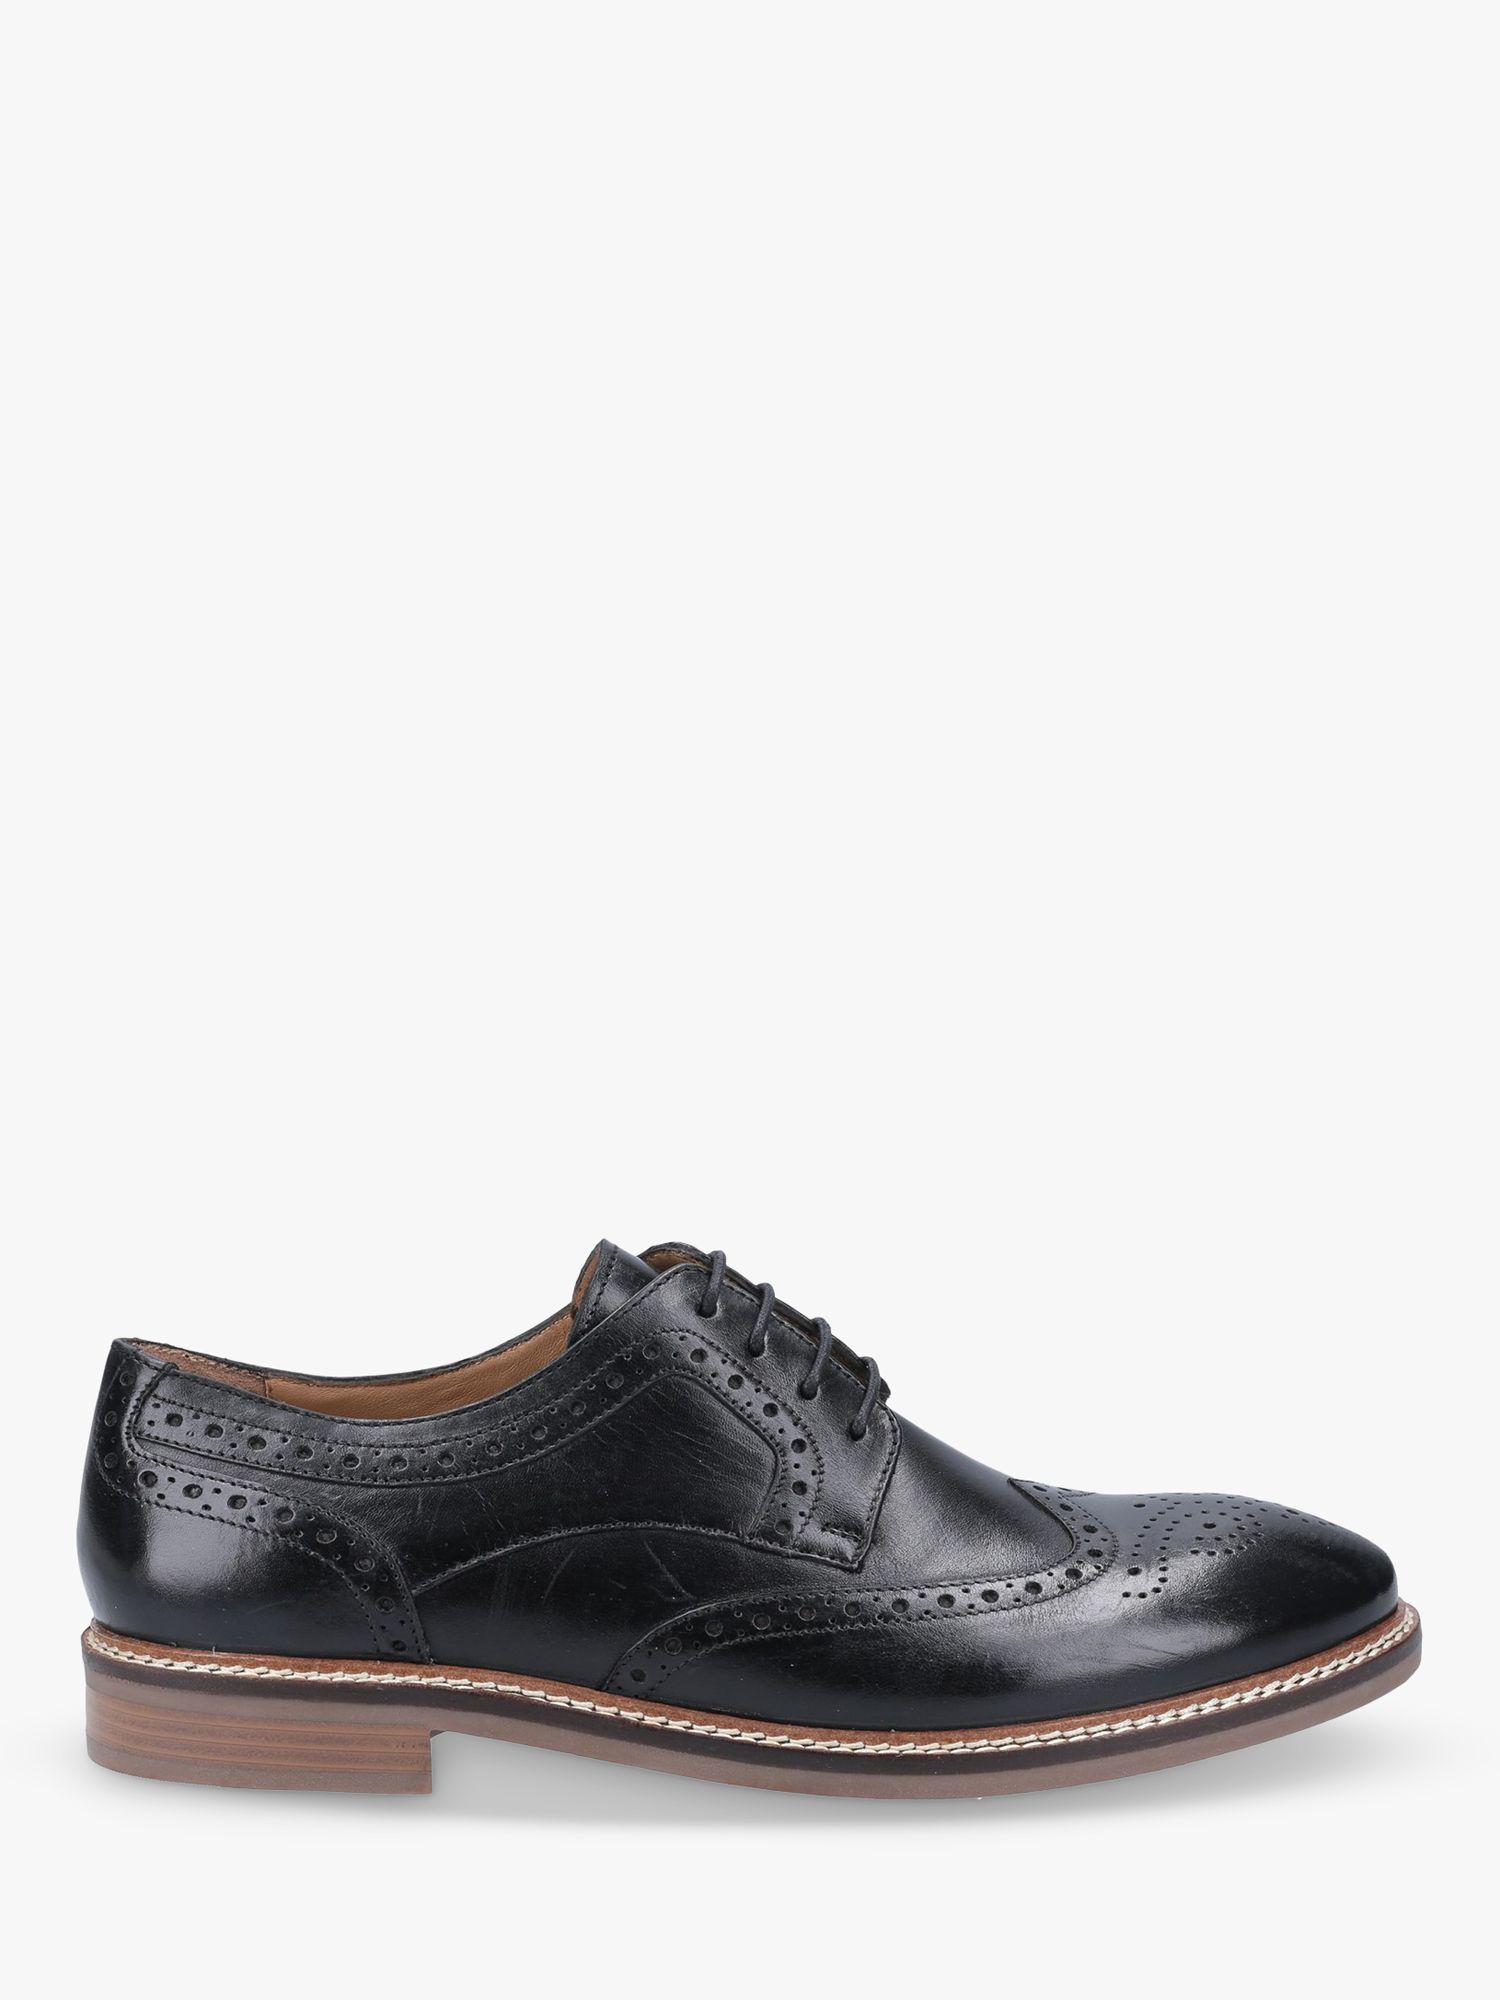 Hush Puppies Bryson Leather Lace Up Brogues, Black at John Lewis & Partners